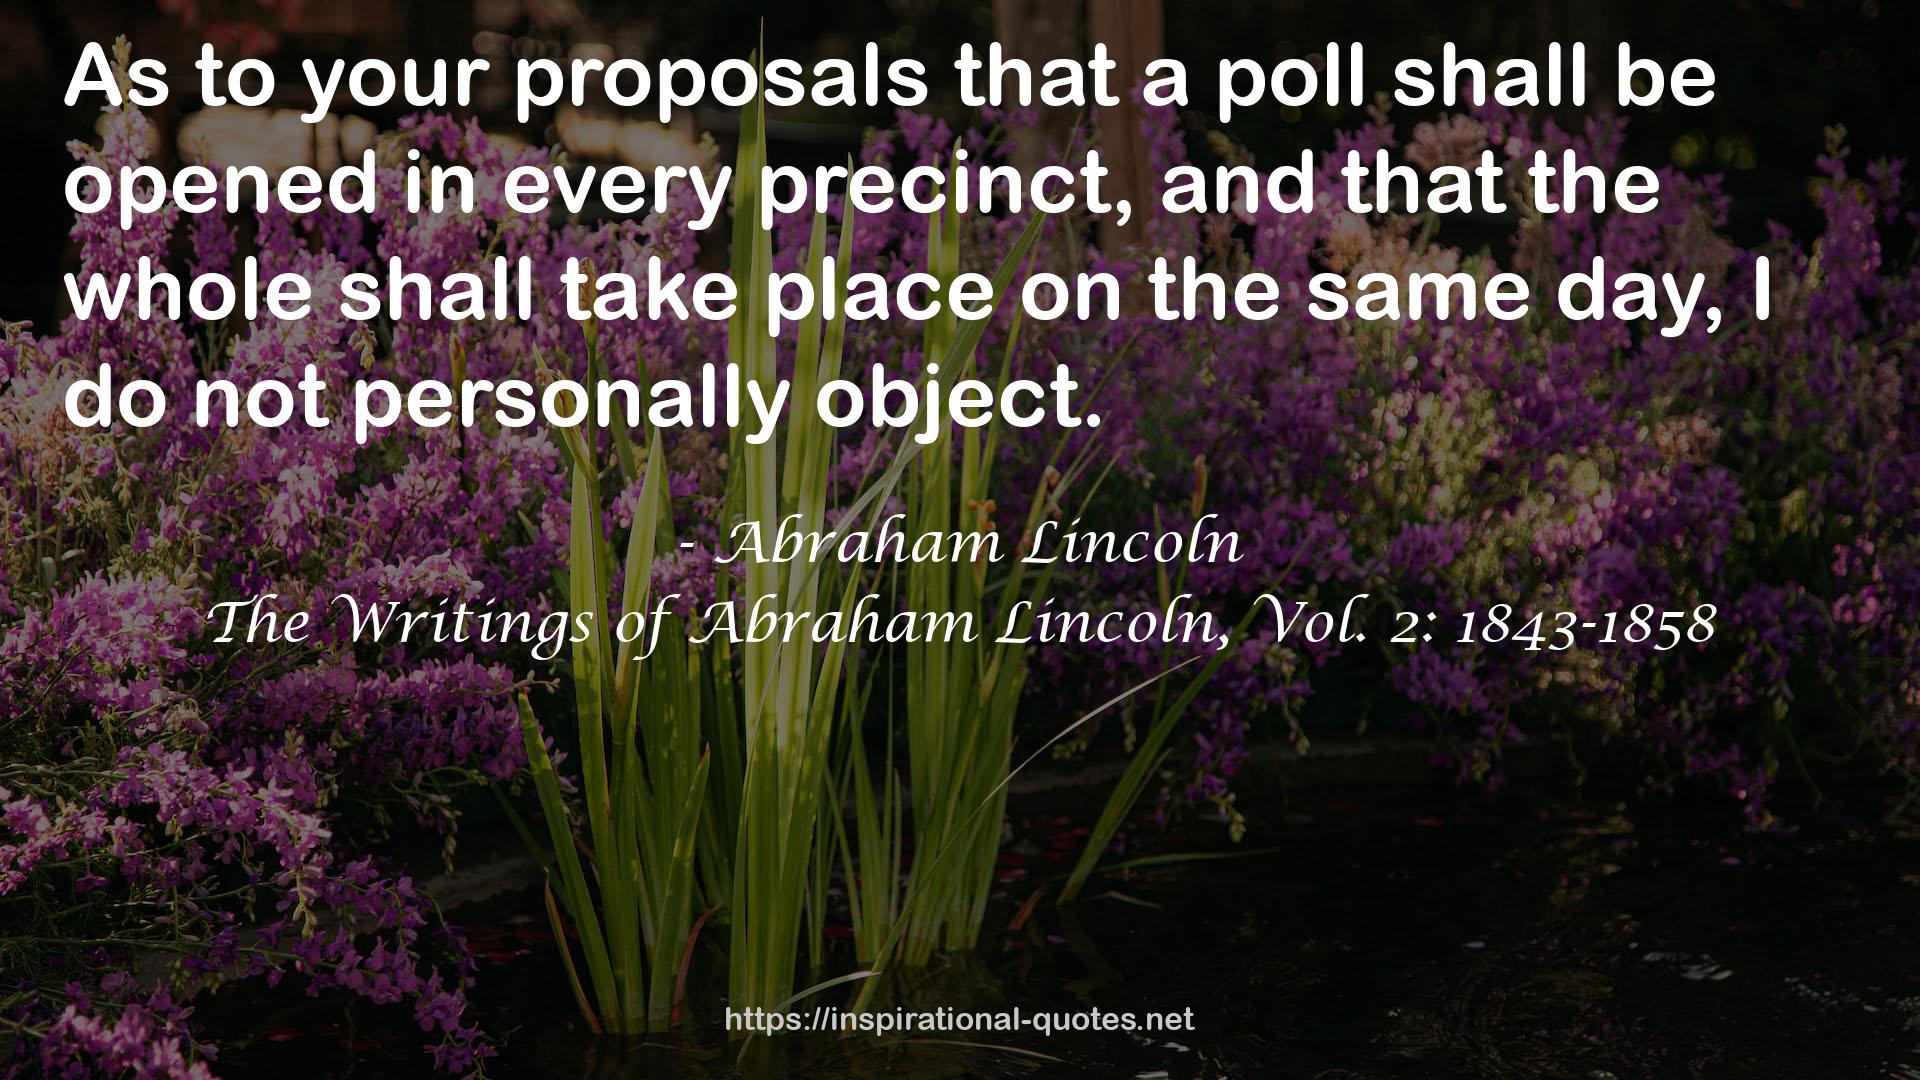 The Writings of Abraham Lincoln, Vol. 2: 1843-1858 QUOTES